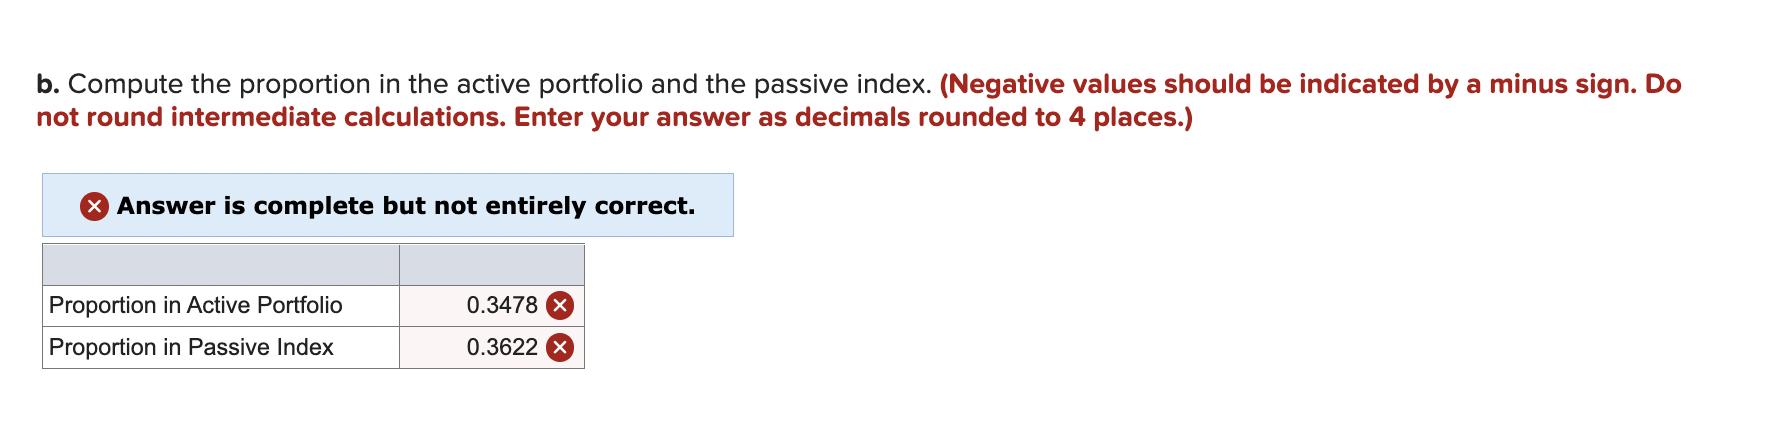 b. Compute the proportion in the active portfolio and the passive index. (Negative values should be indicated by a minus sign